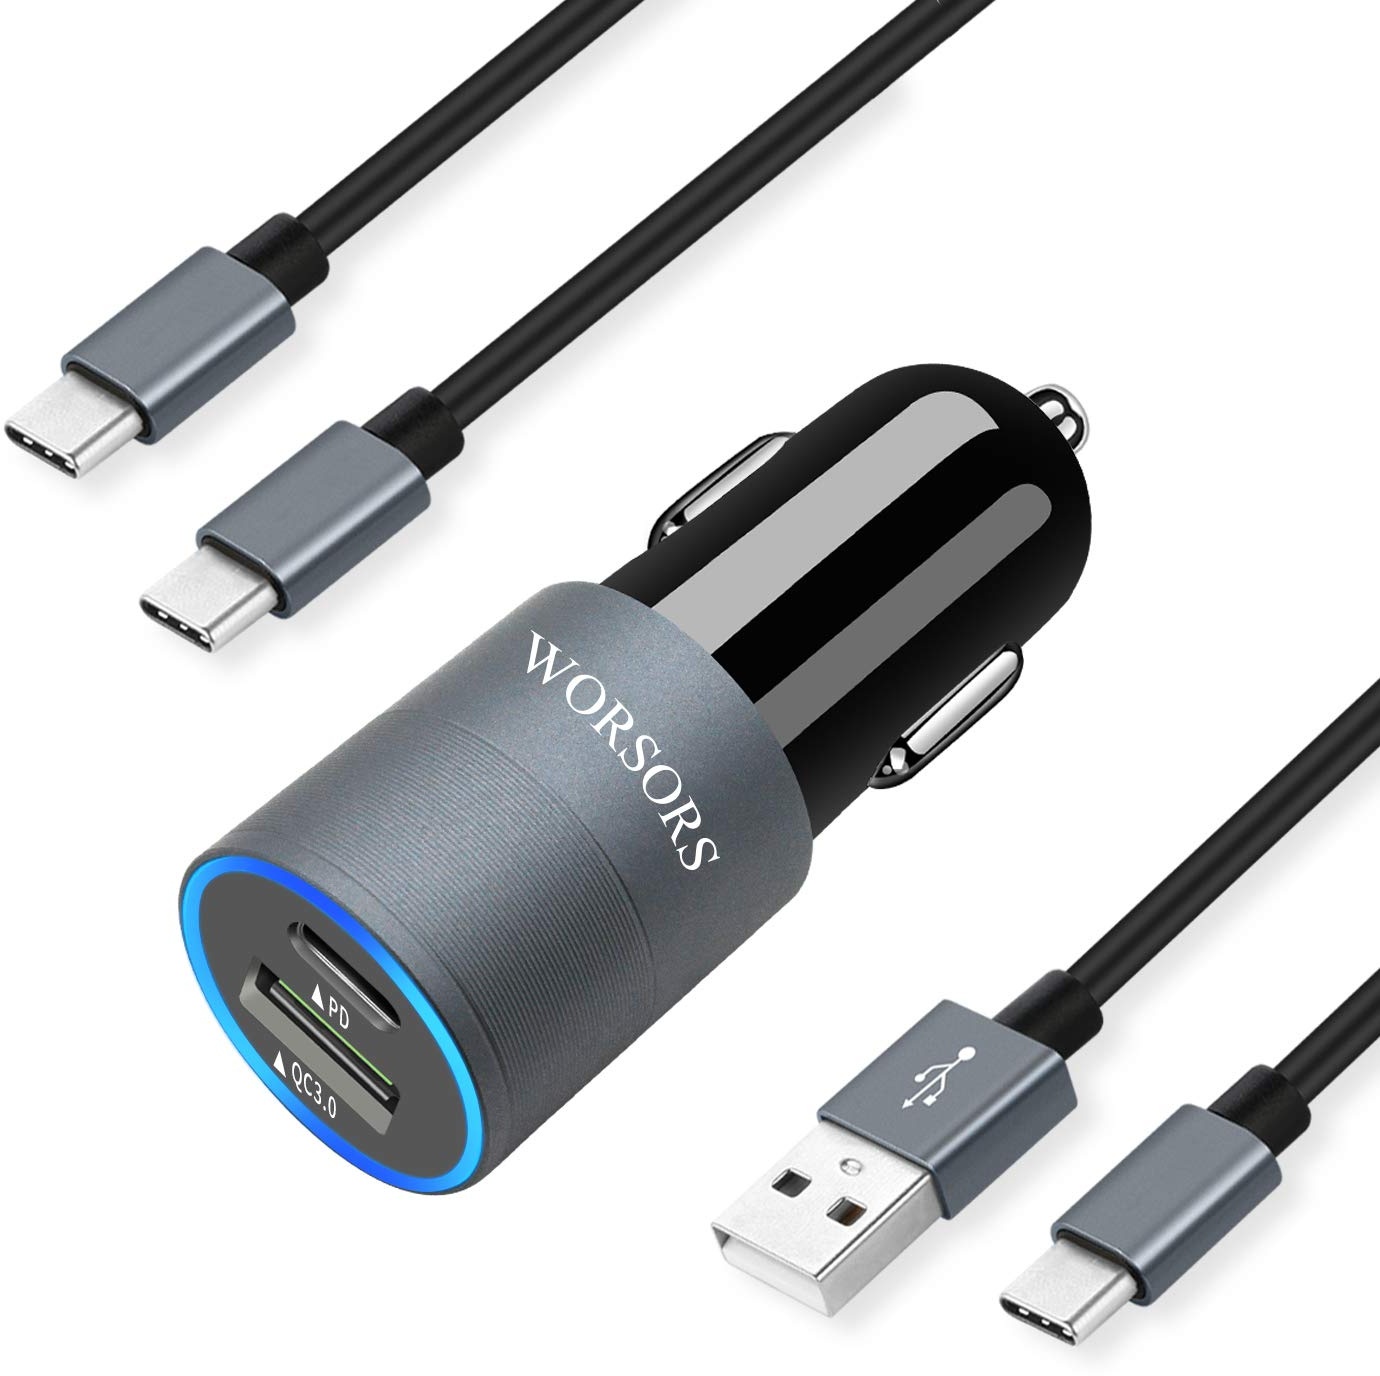 Upgraded Super Fast Car Charger, Worsors USB C 25W PPS PD & 18W QC3.0 Power Adapter Compatible for Samsung Galaxy S21 Ultra/Plus/S20/S10 Lite, Note 20/10, A71/A51 5G, Fold 2 + 2Pack 3.3ft Type C Cable